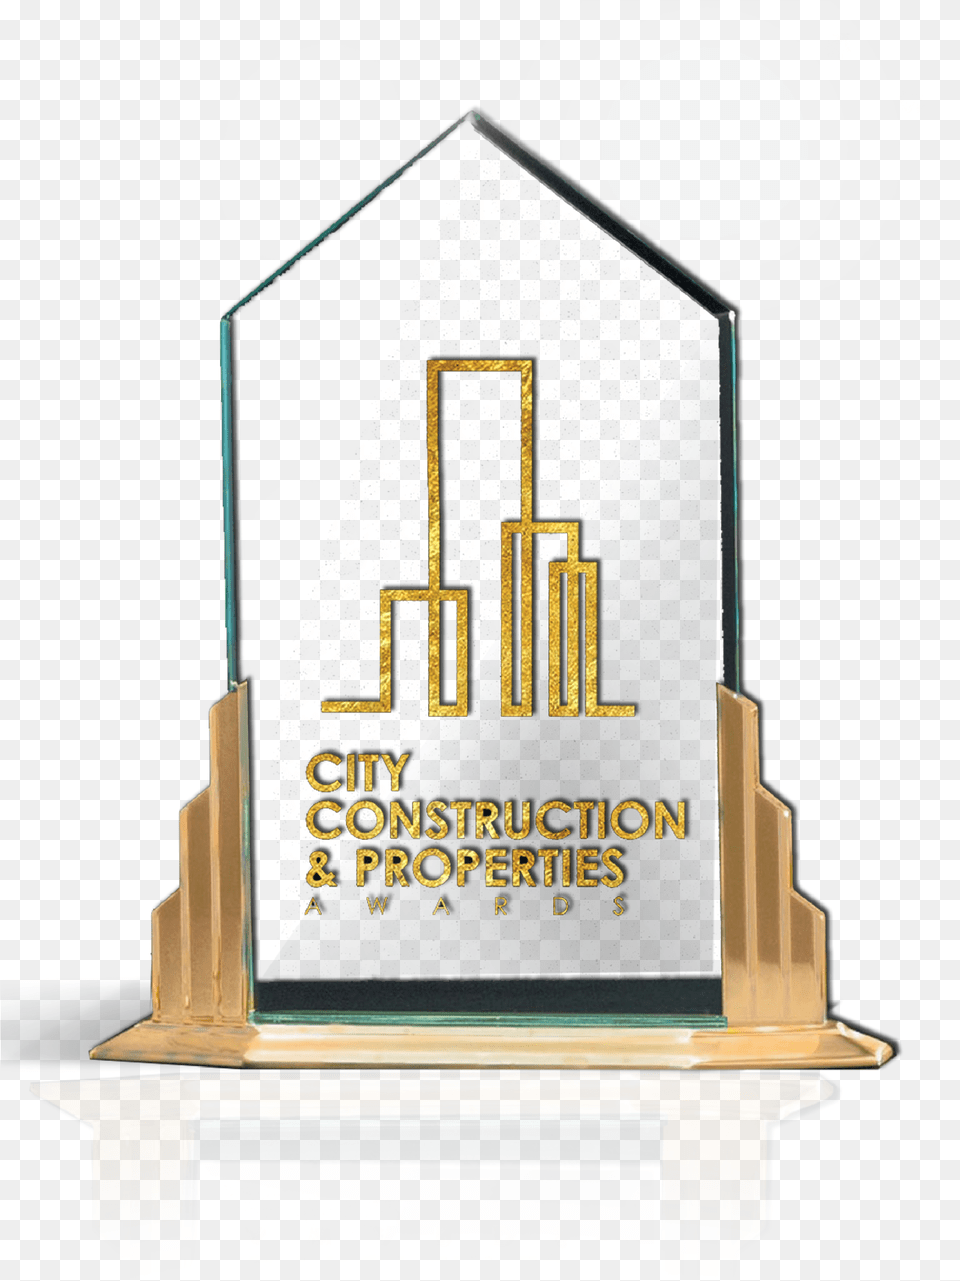 City Construction And Property Award, Tomb, Gravestone, Altar, Architecture Free Transparent Png